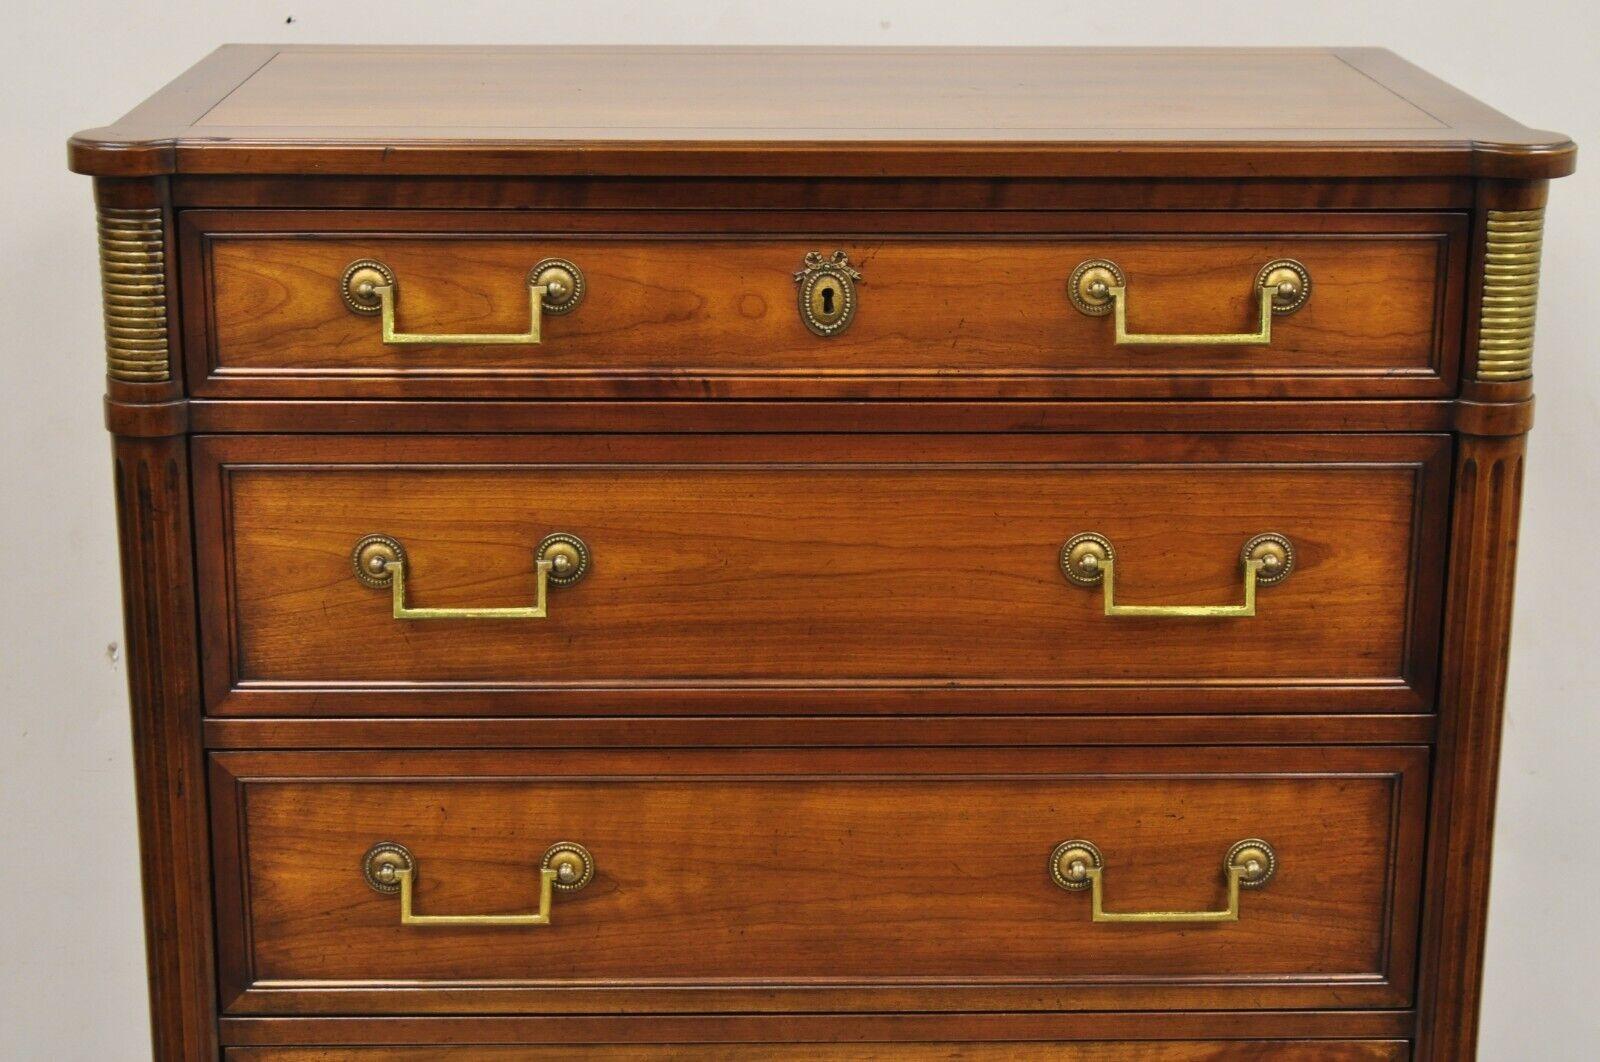 Kindel Milano Louis XVI Style 6 Drawer Highboy Cherry Wood Tall Chest Dresser In Good Condition For Sale In Philadelphia, PA